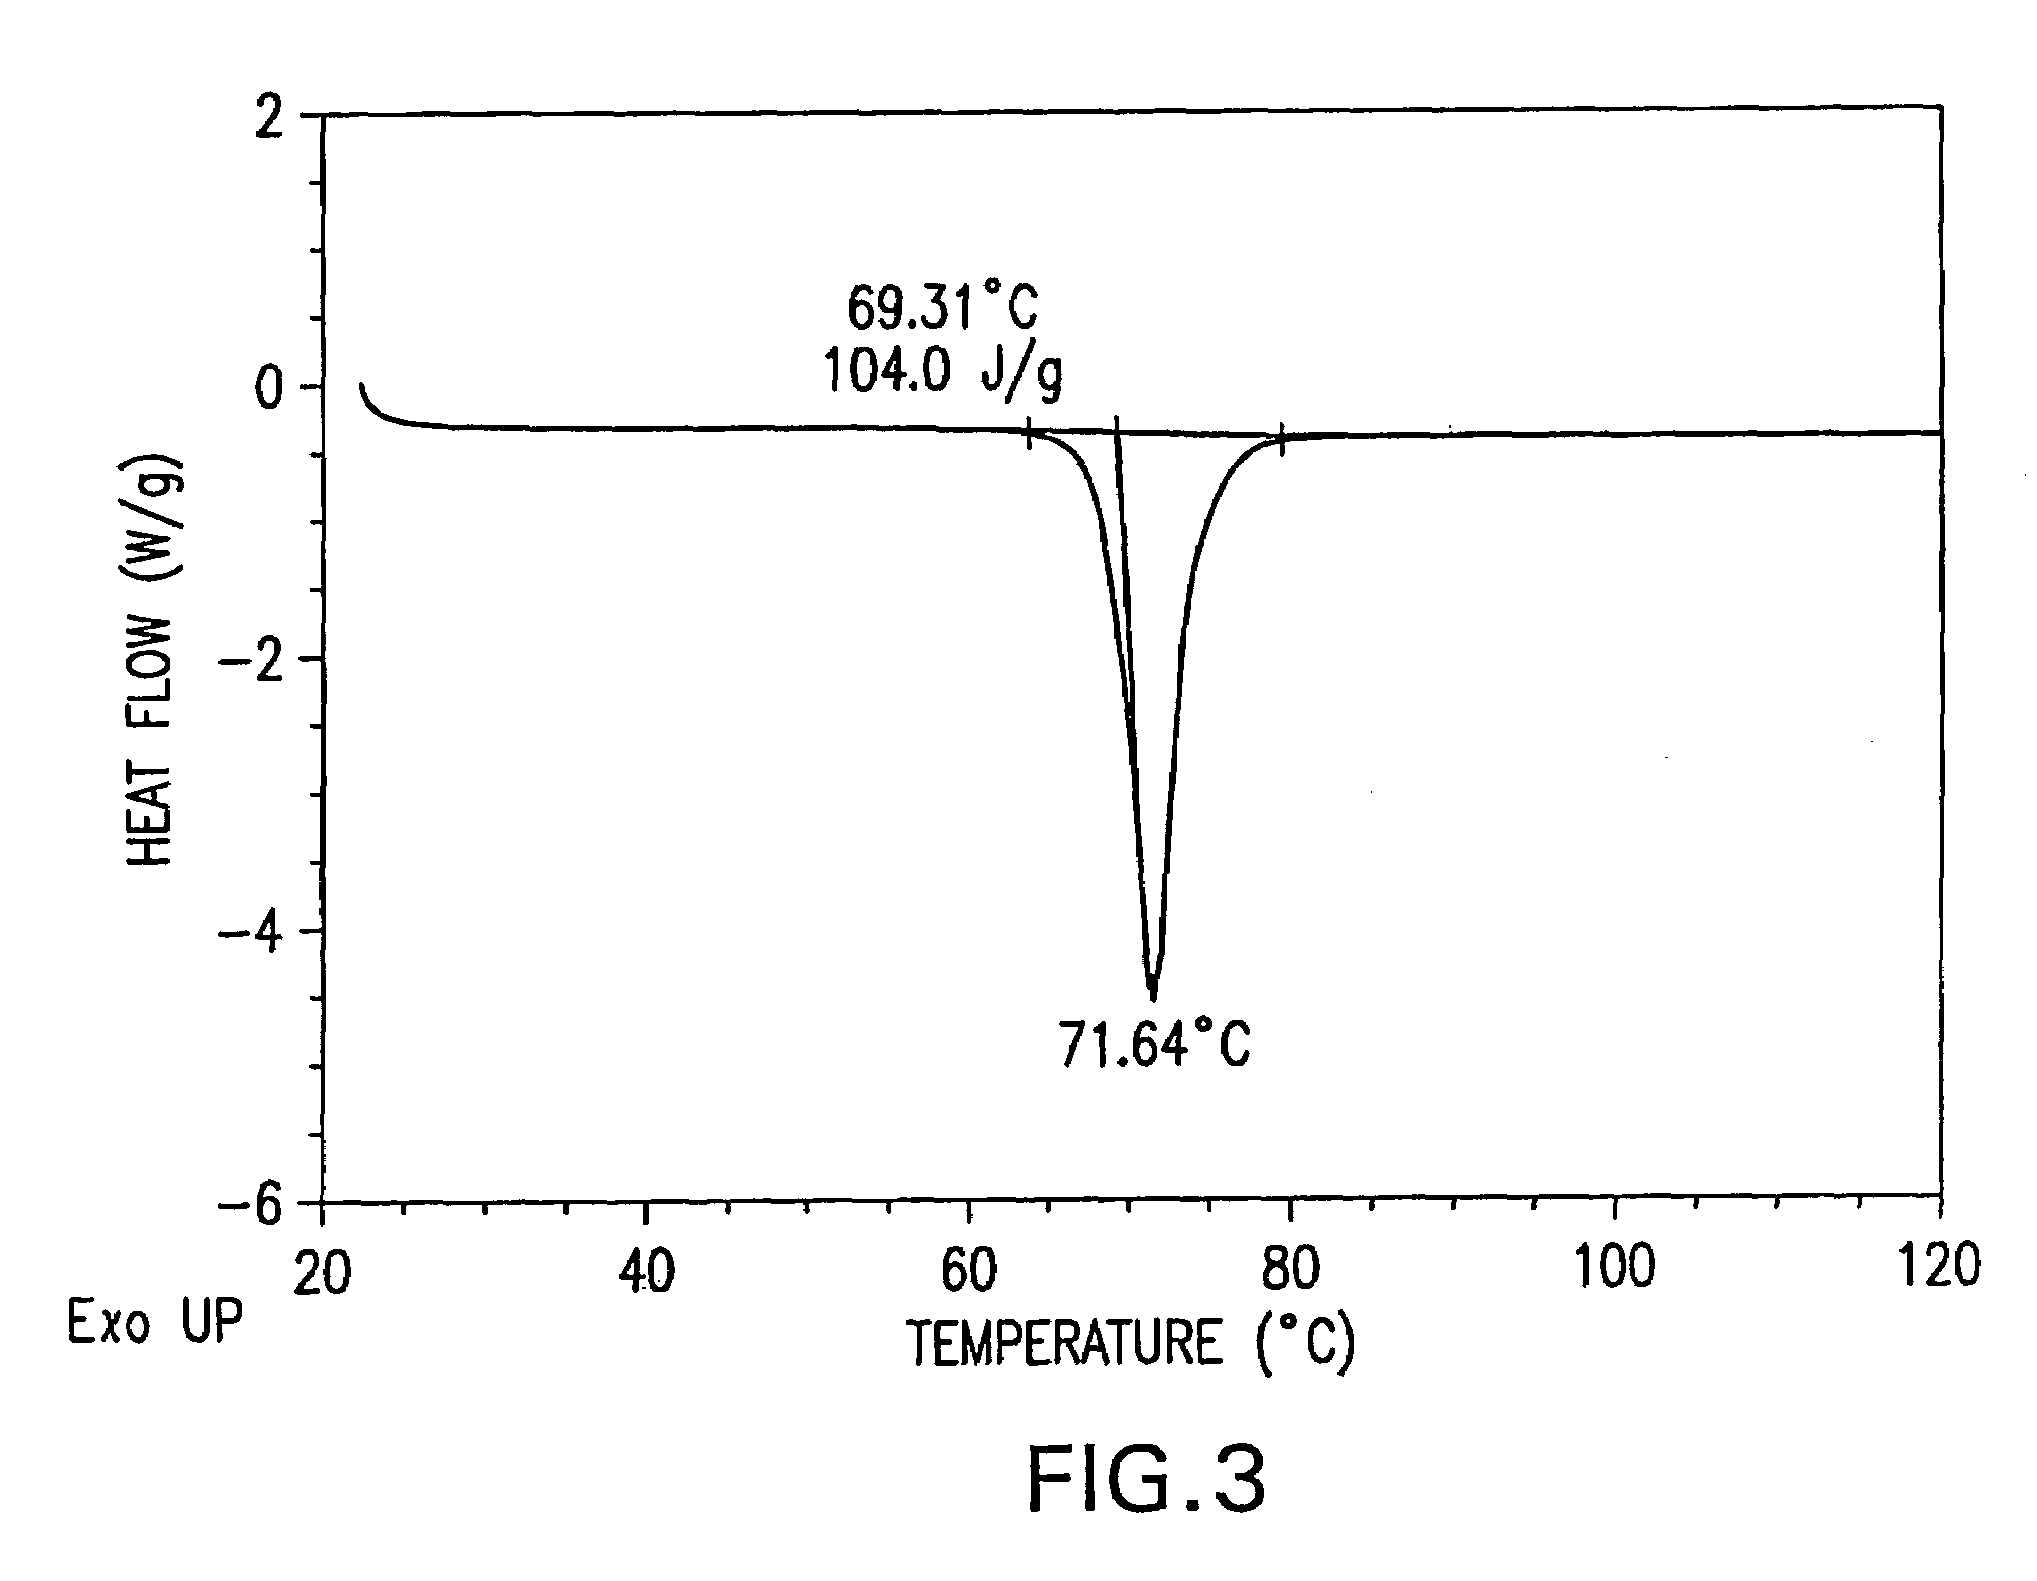 Formation of tetra-substituted enamides and stereoselective reduction thereof